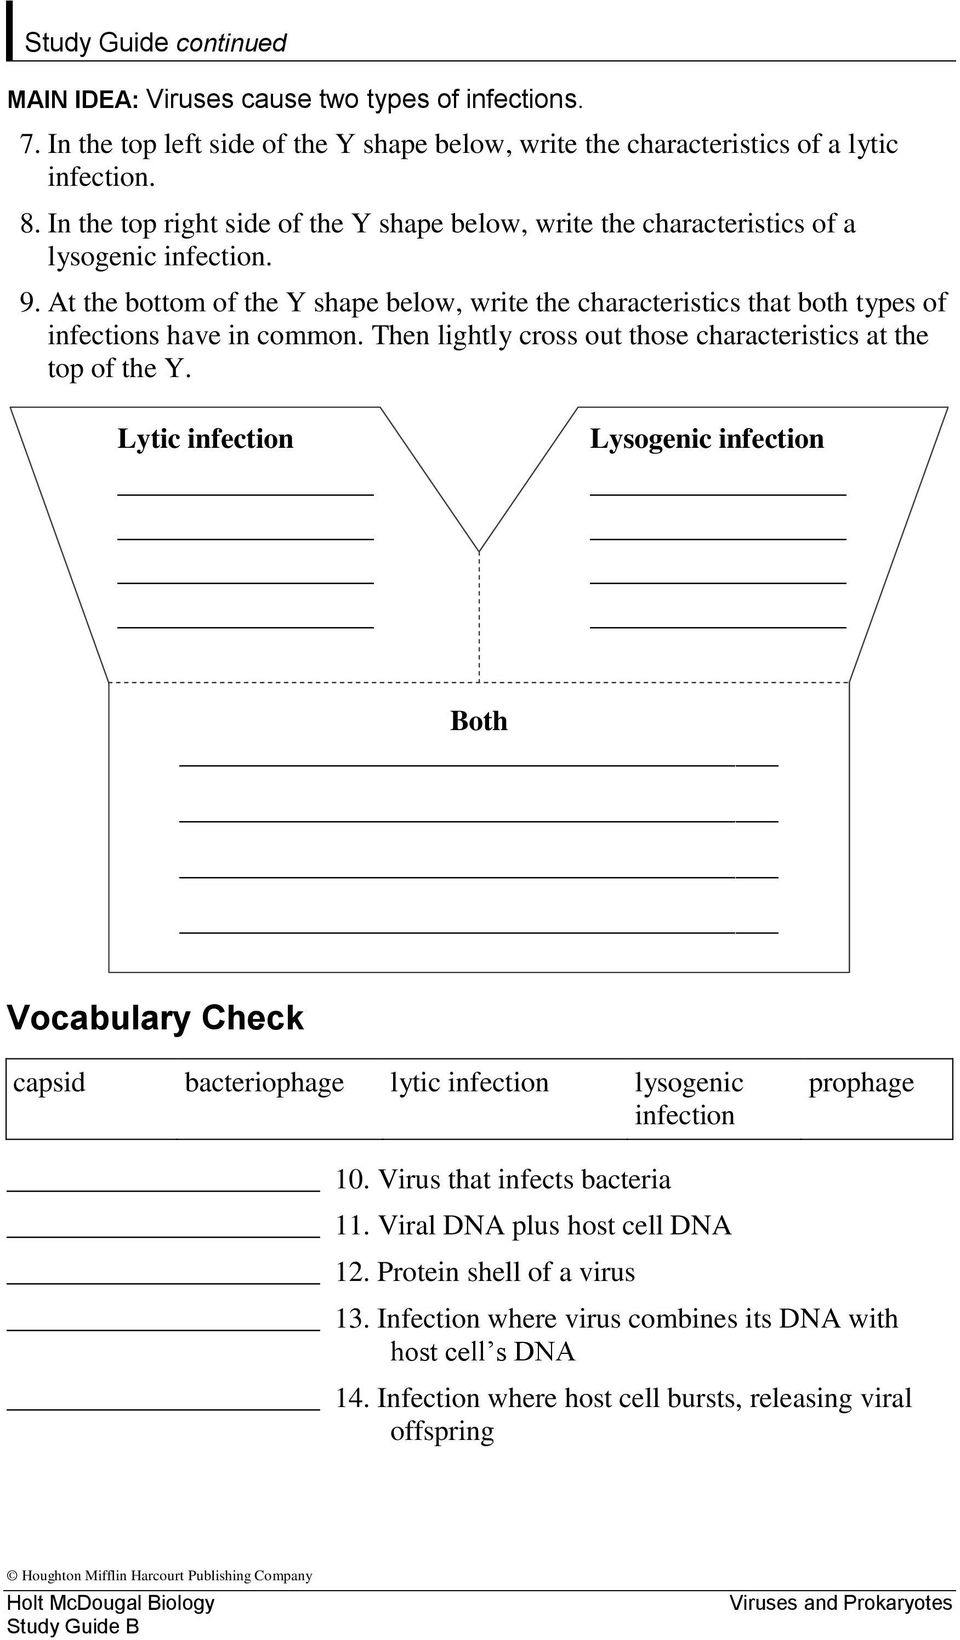 At the bottom of the Y shape below, write the characteristics that both types of infections have in common. Then lightly cross out those characteristics at the top of the Y.